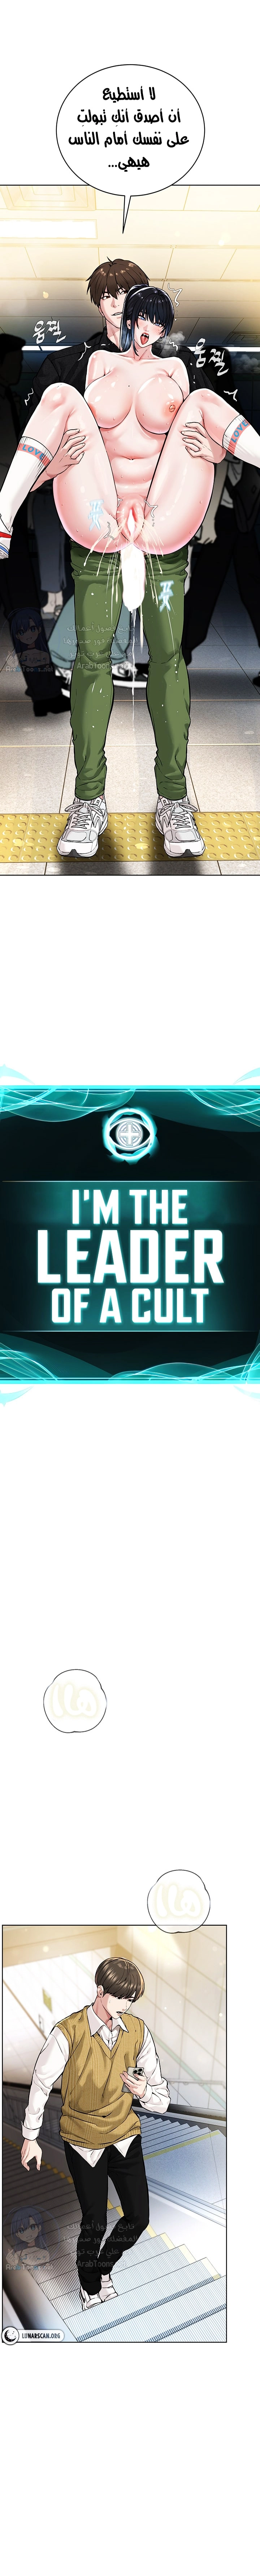 I’m The Leader Of A Cult - 10 - 65ded0b02a0b2.webp